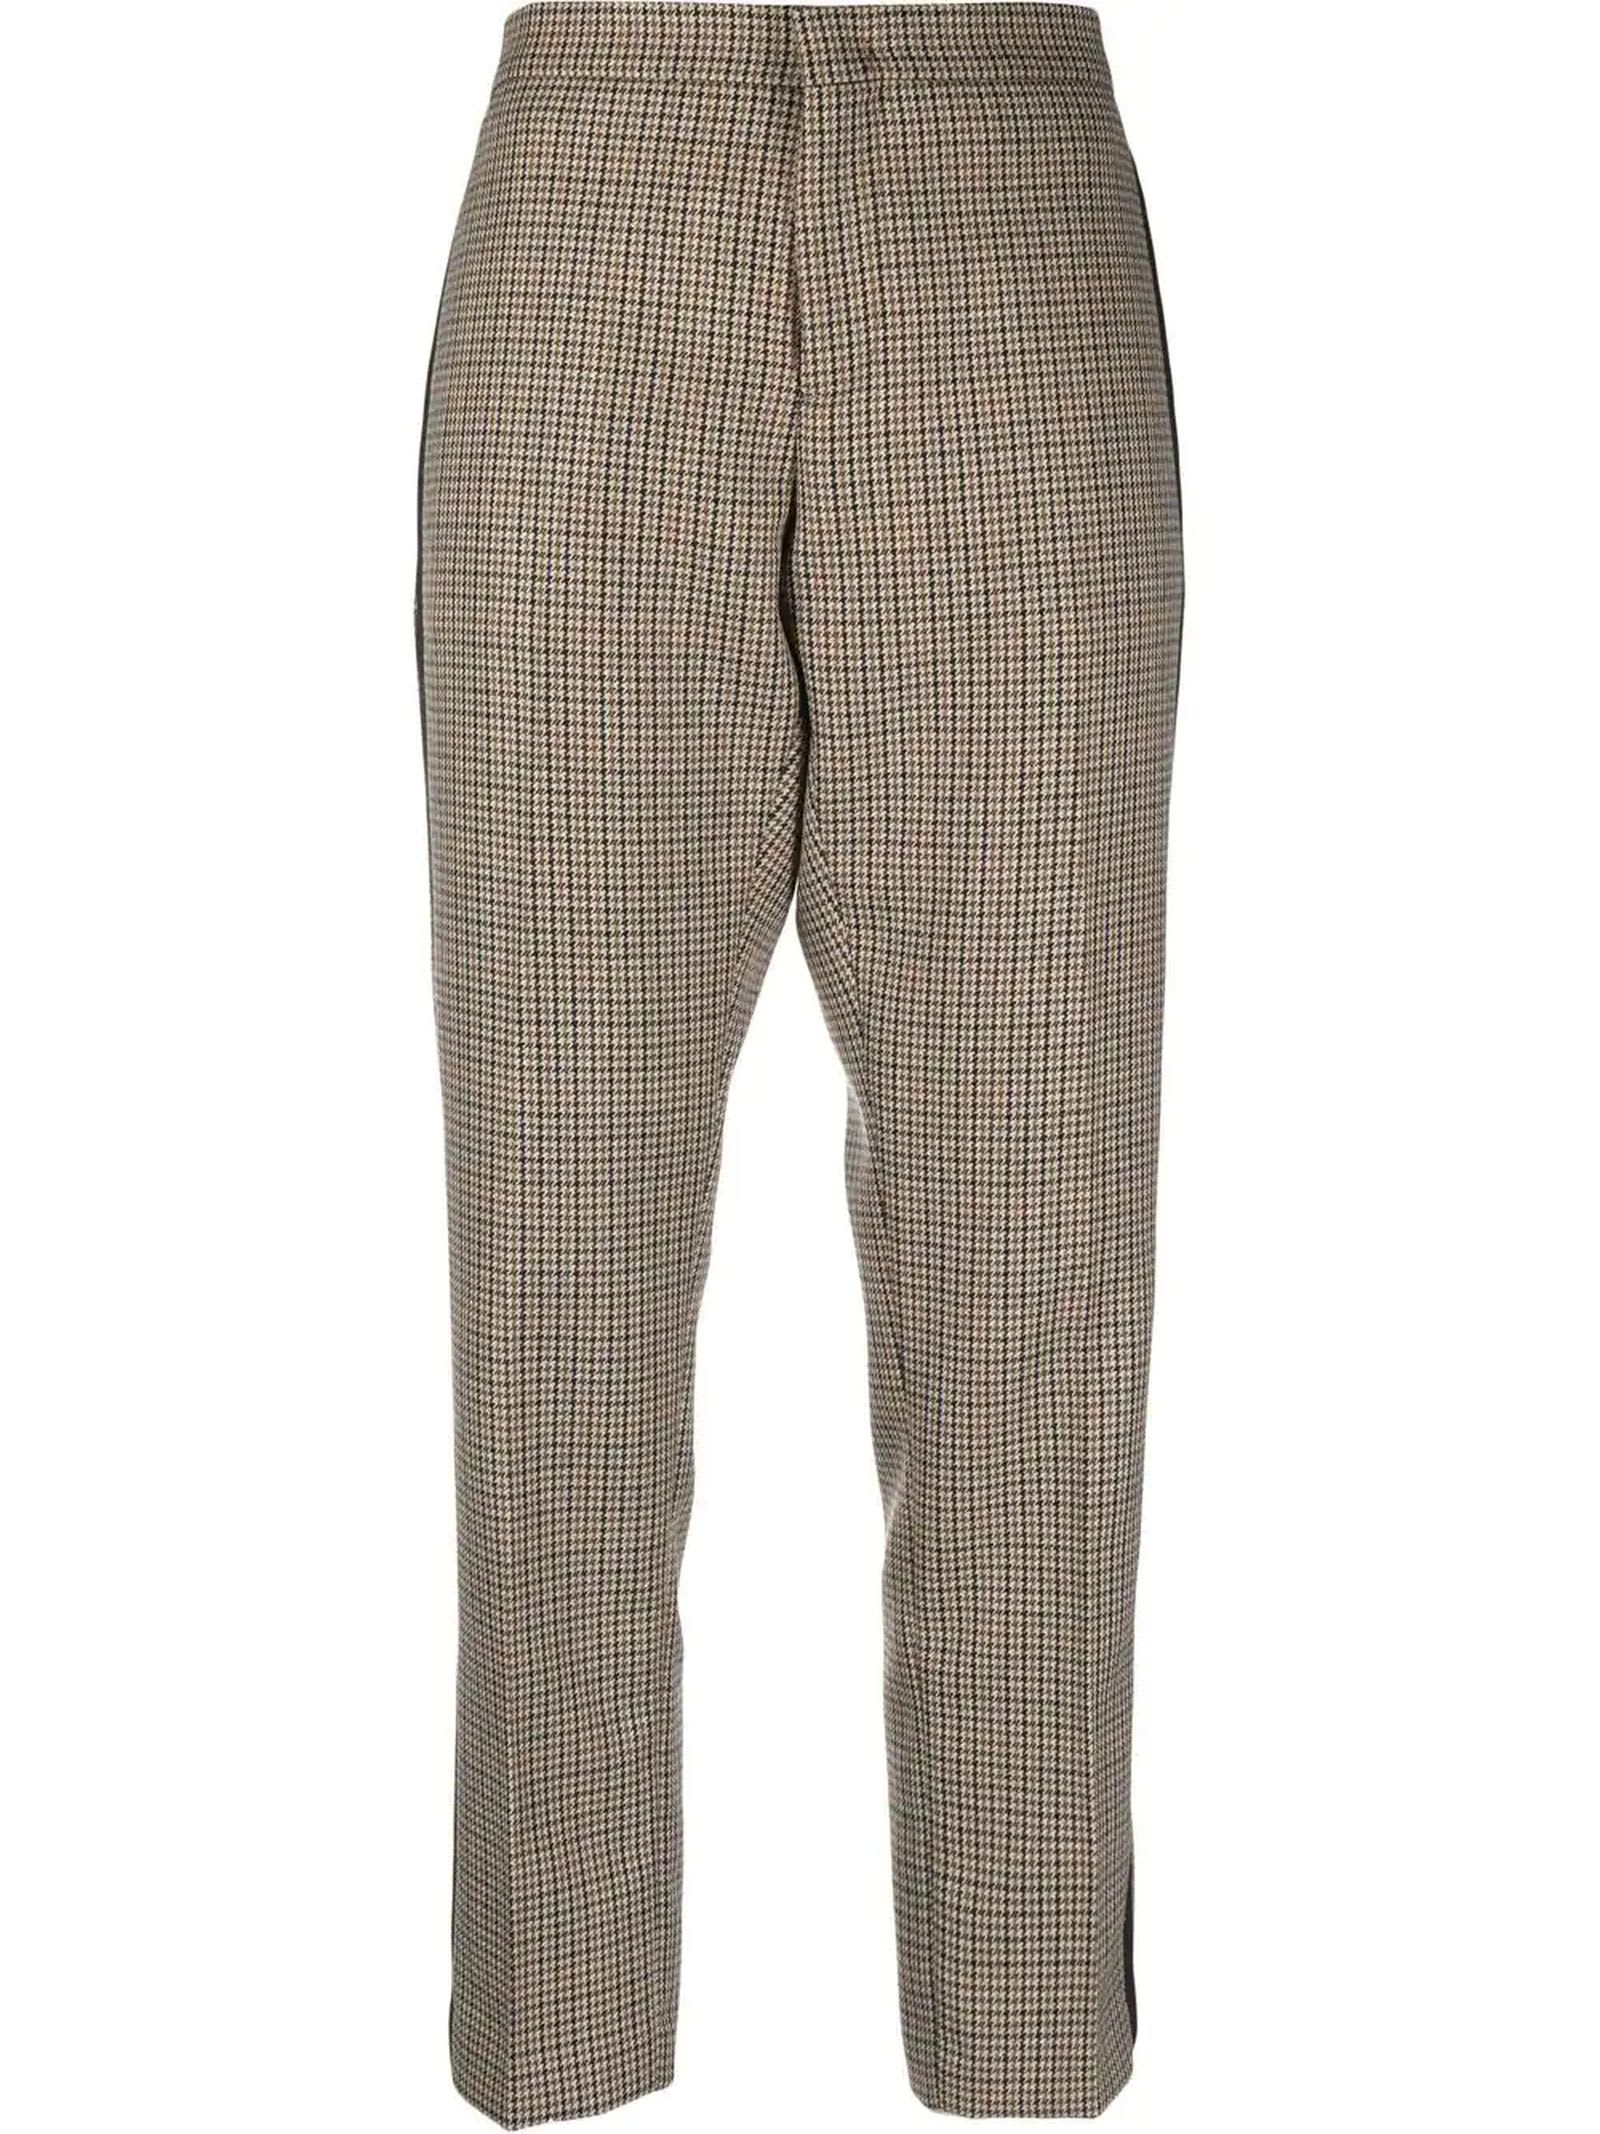 N.21 Houndstooth Cropped Trousers